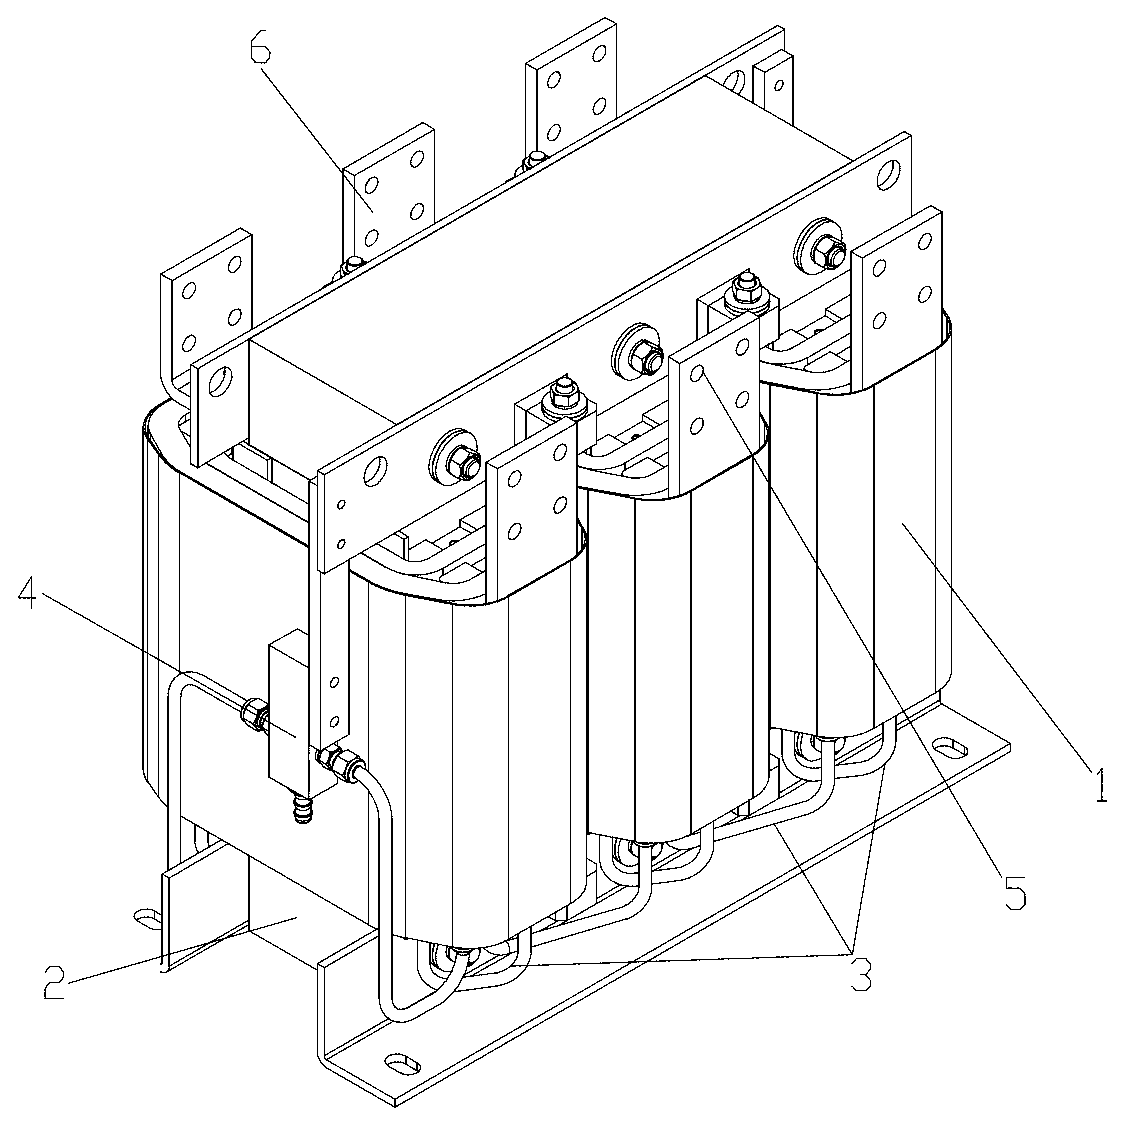 Water-cooling electric reactor